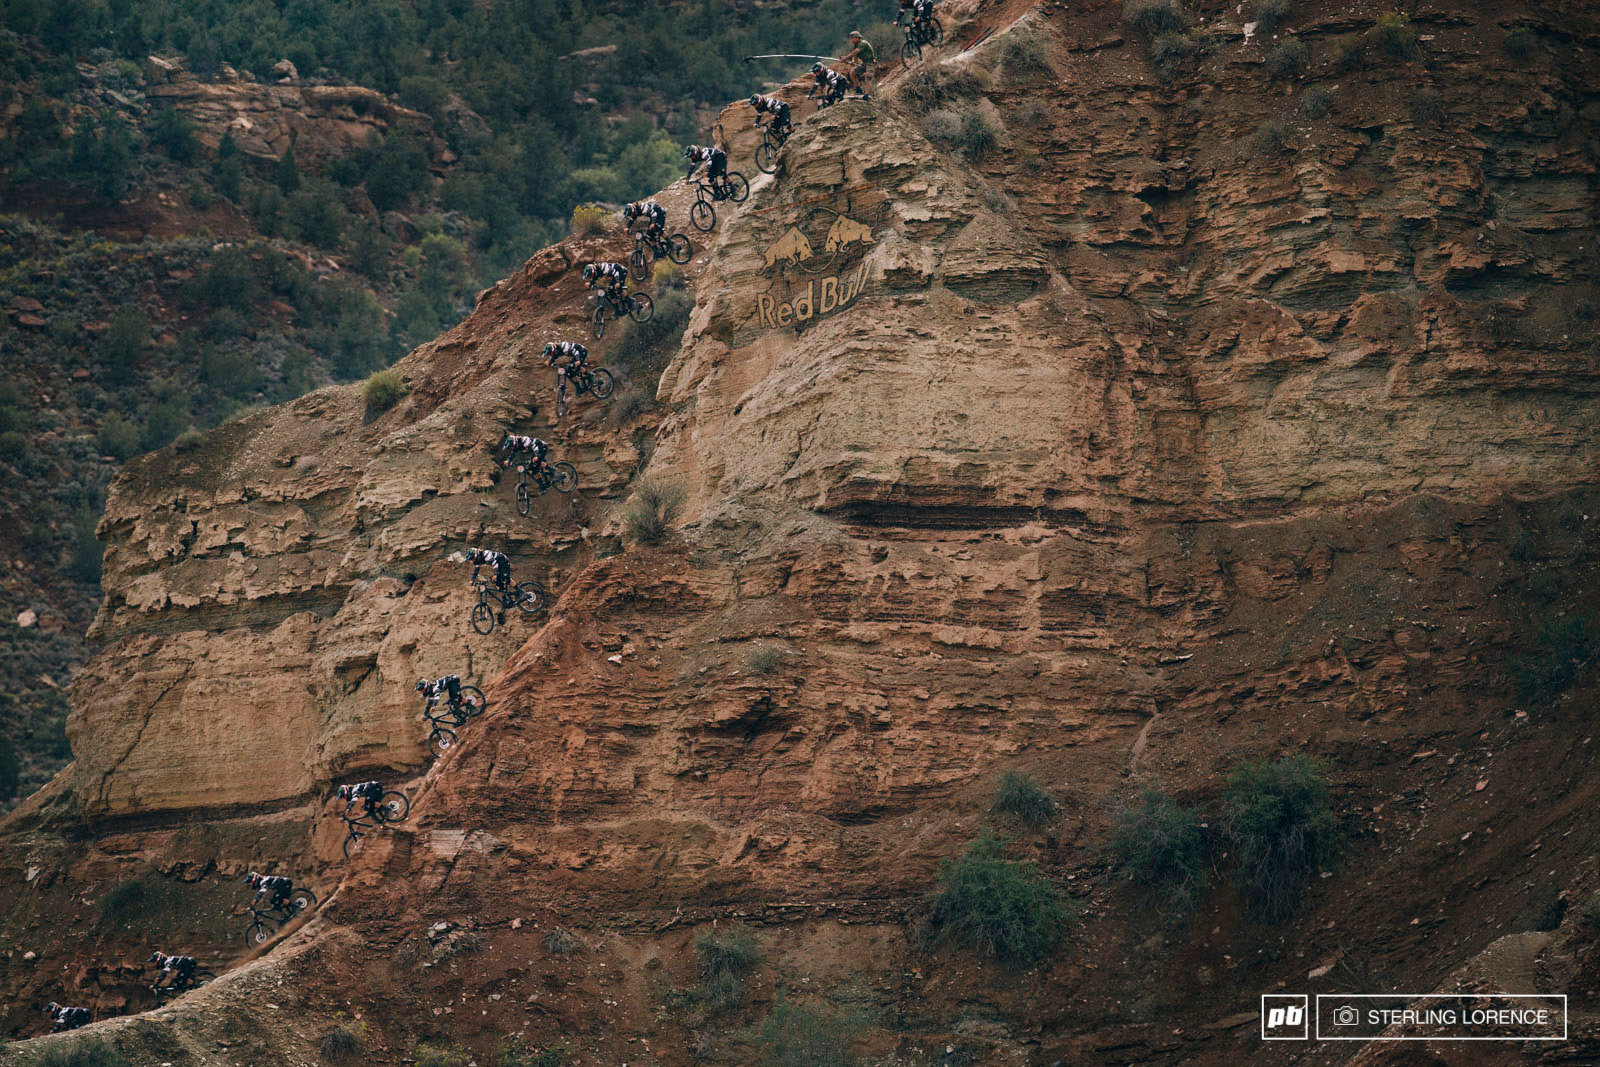 Graham Agassiz s huge cliff drop sequence at RedBull Rampage 2014.